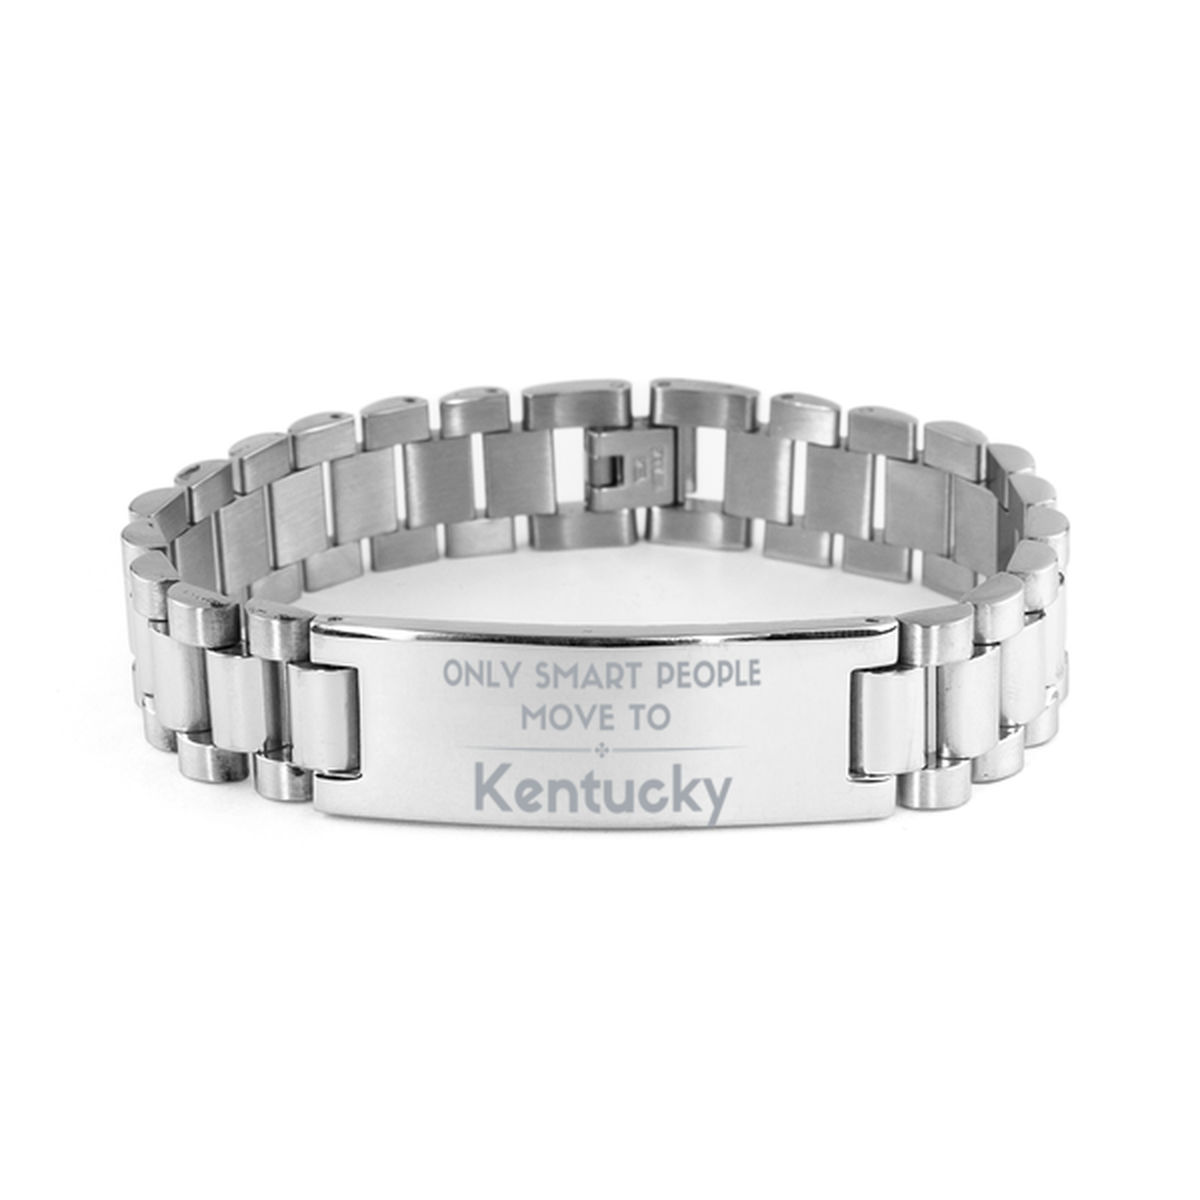 Only smart people move to Kentucky Ladder Stainless Steel Bracelet, Gag Gifts For Kentucky, Move to Kentucky Gifts for Friends Coworker Funny Saying Quote